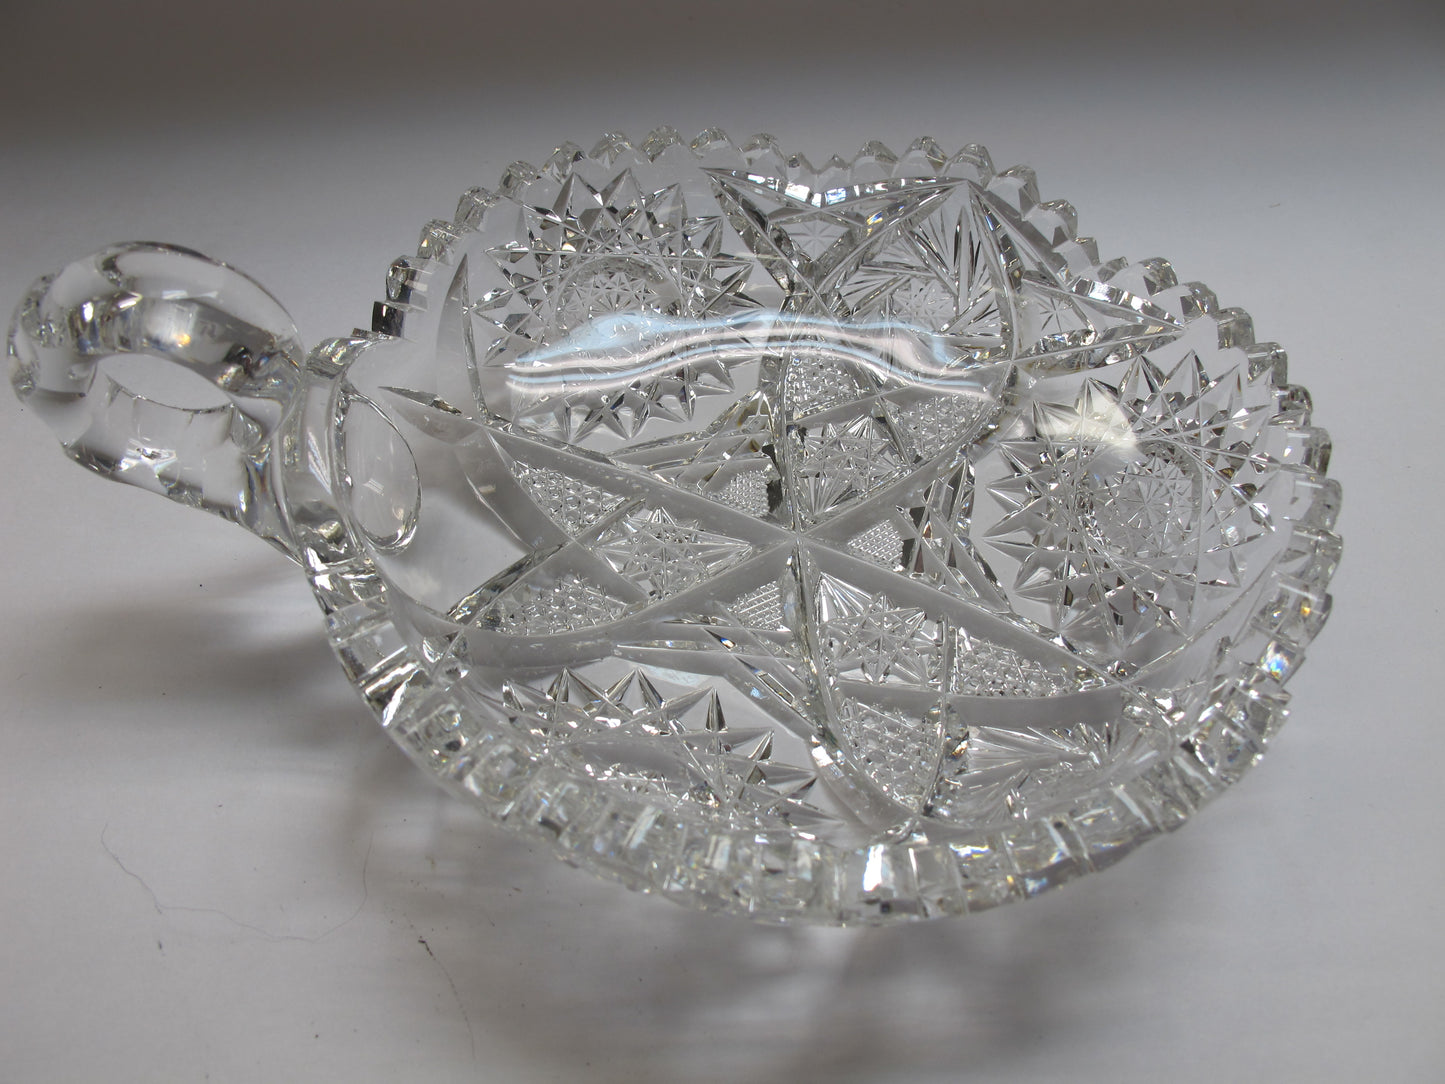 American Brilliant Period 6" Nappy cut glass Antique auction - O'Rourke crystal awards & gifts abp cut glass